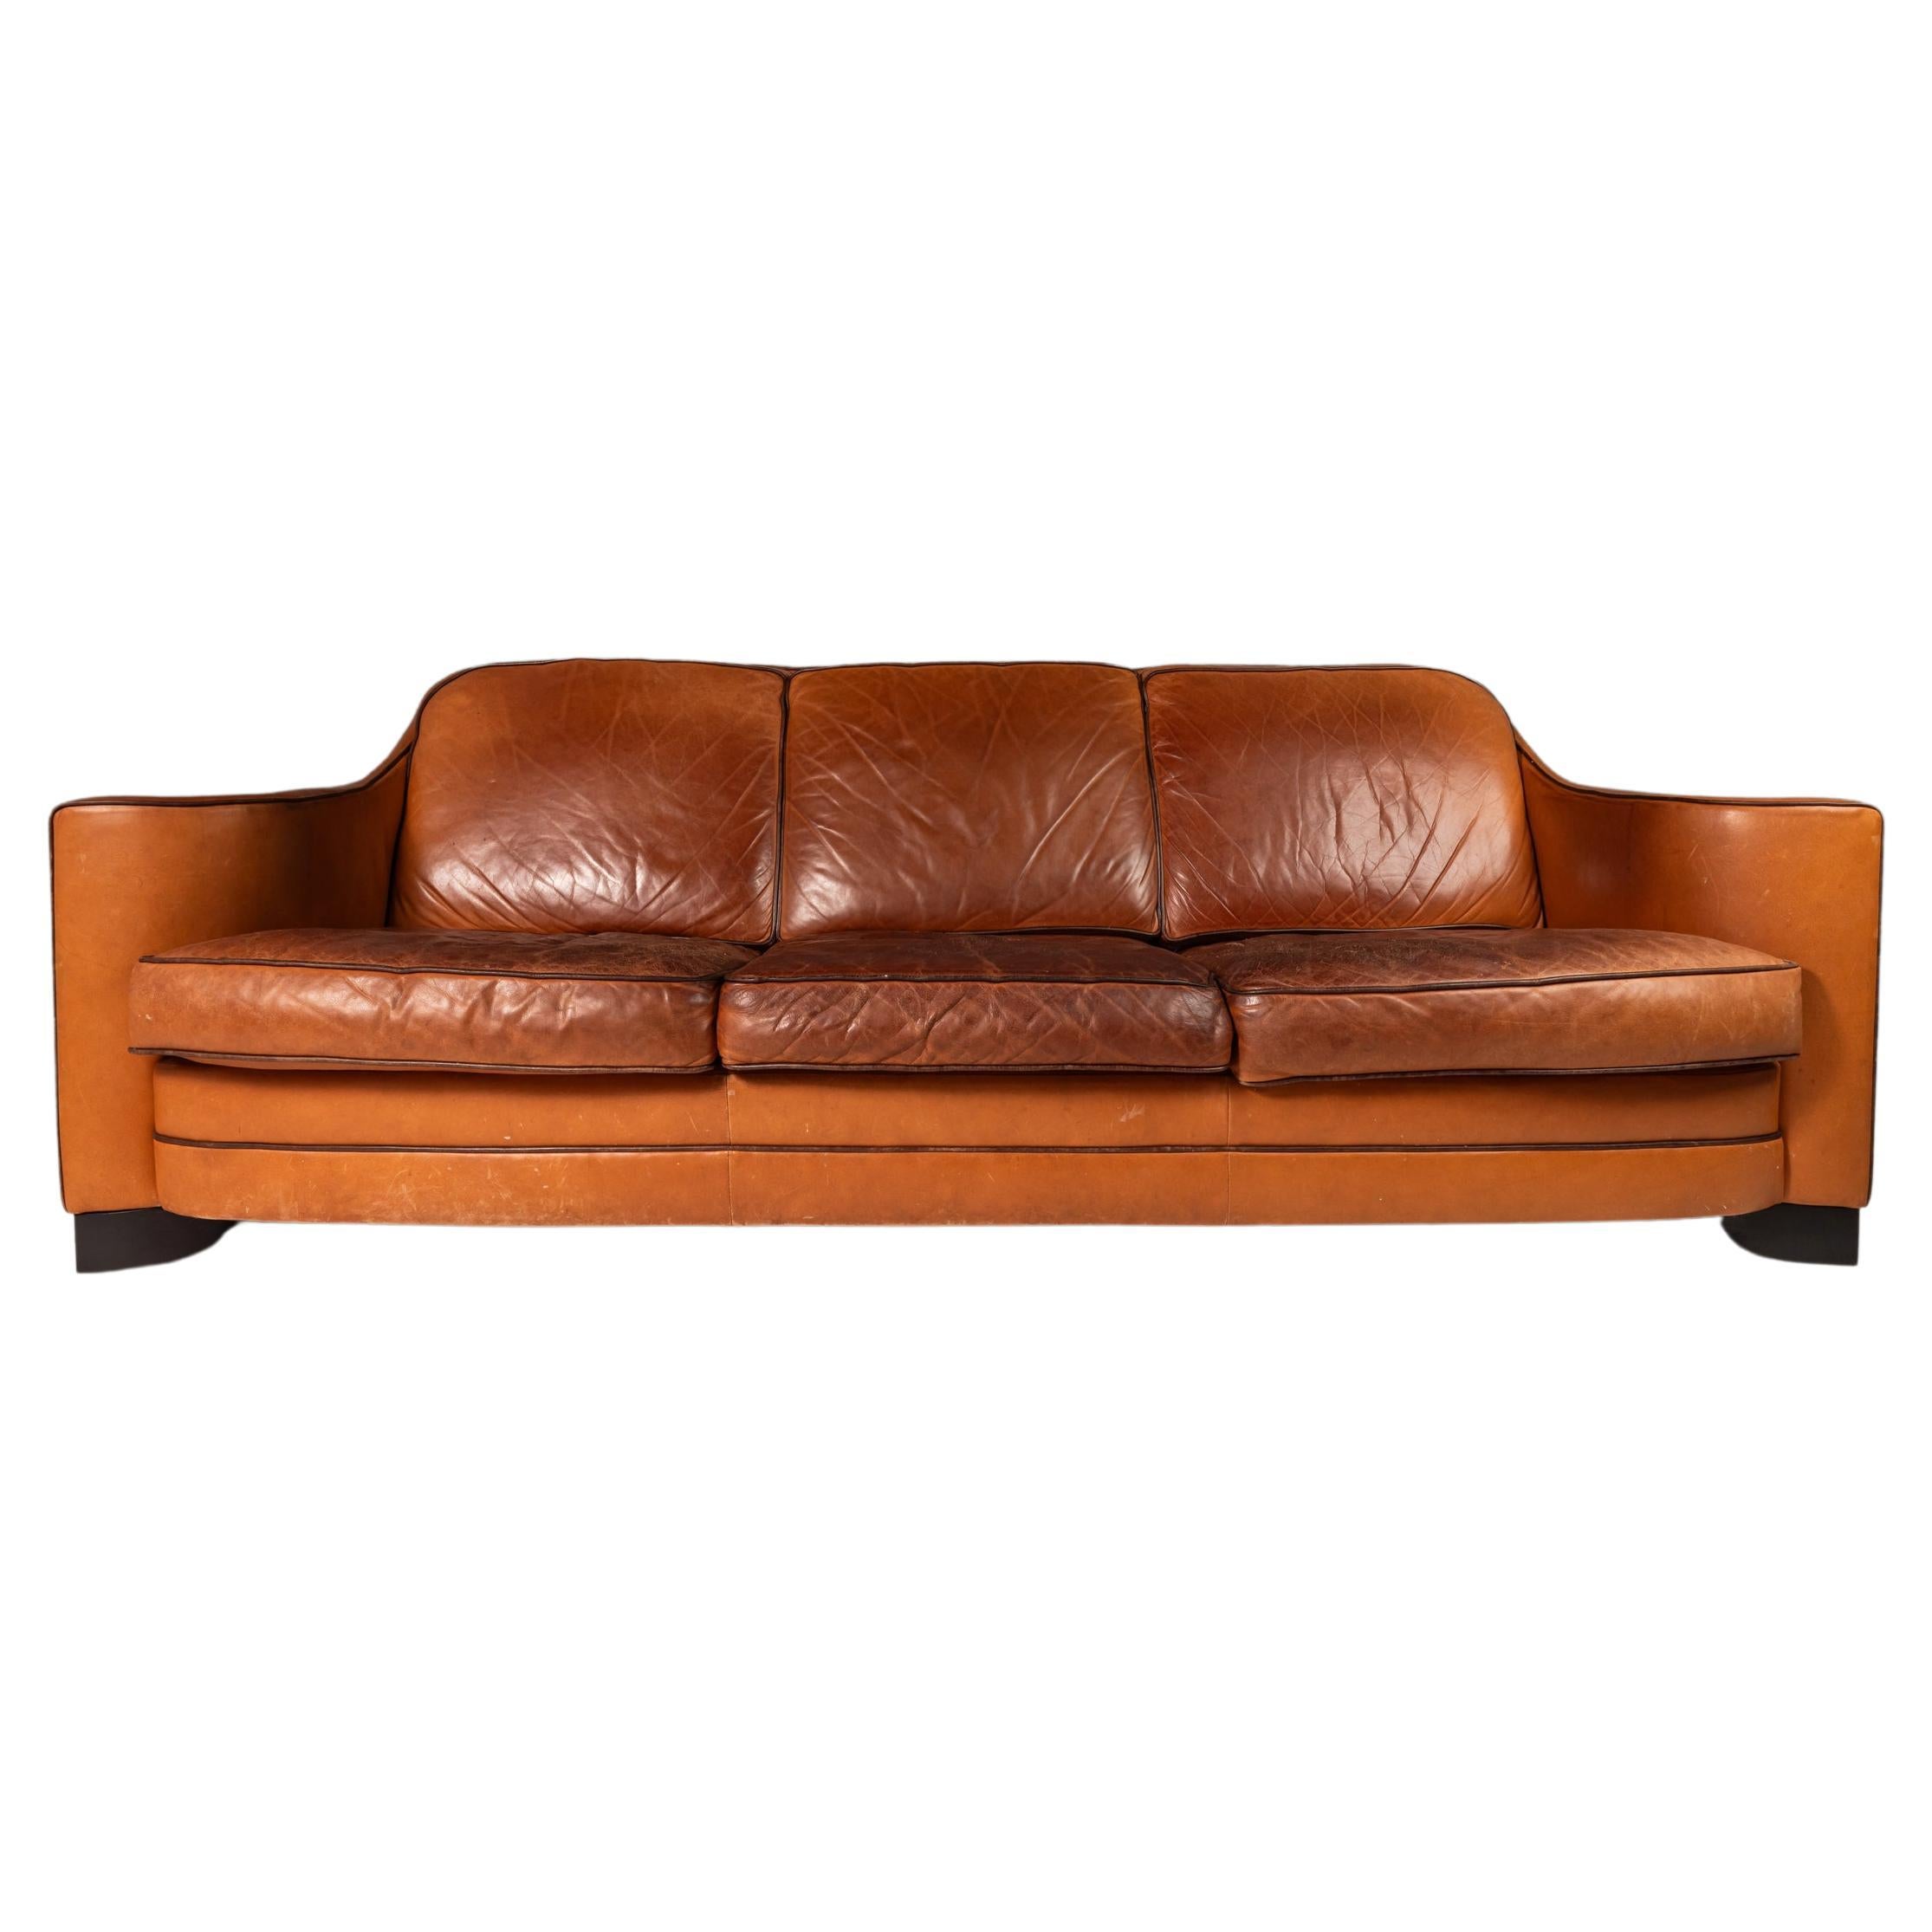 Art Deco Style Three-Seater Sofa with Sculptural Arms in Patinaed Leather, 1970s For Sale